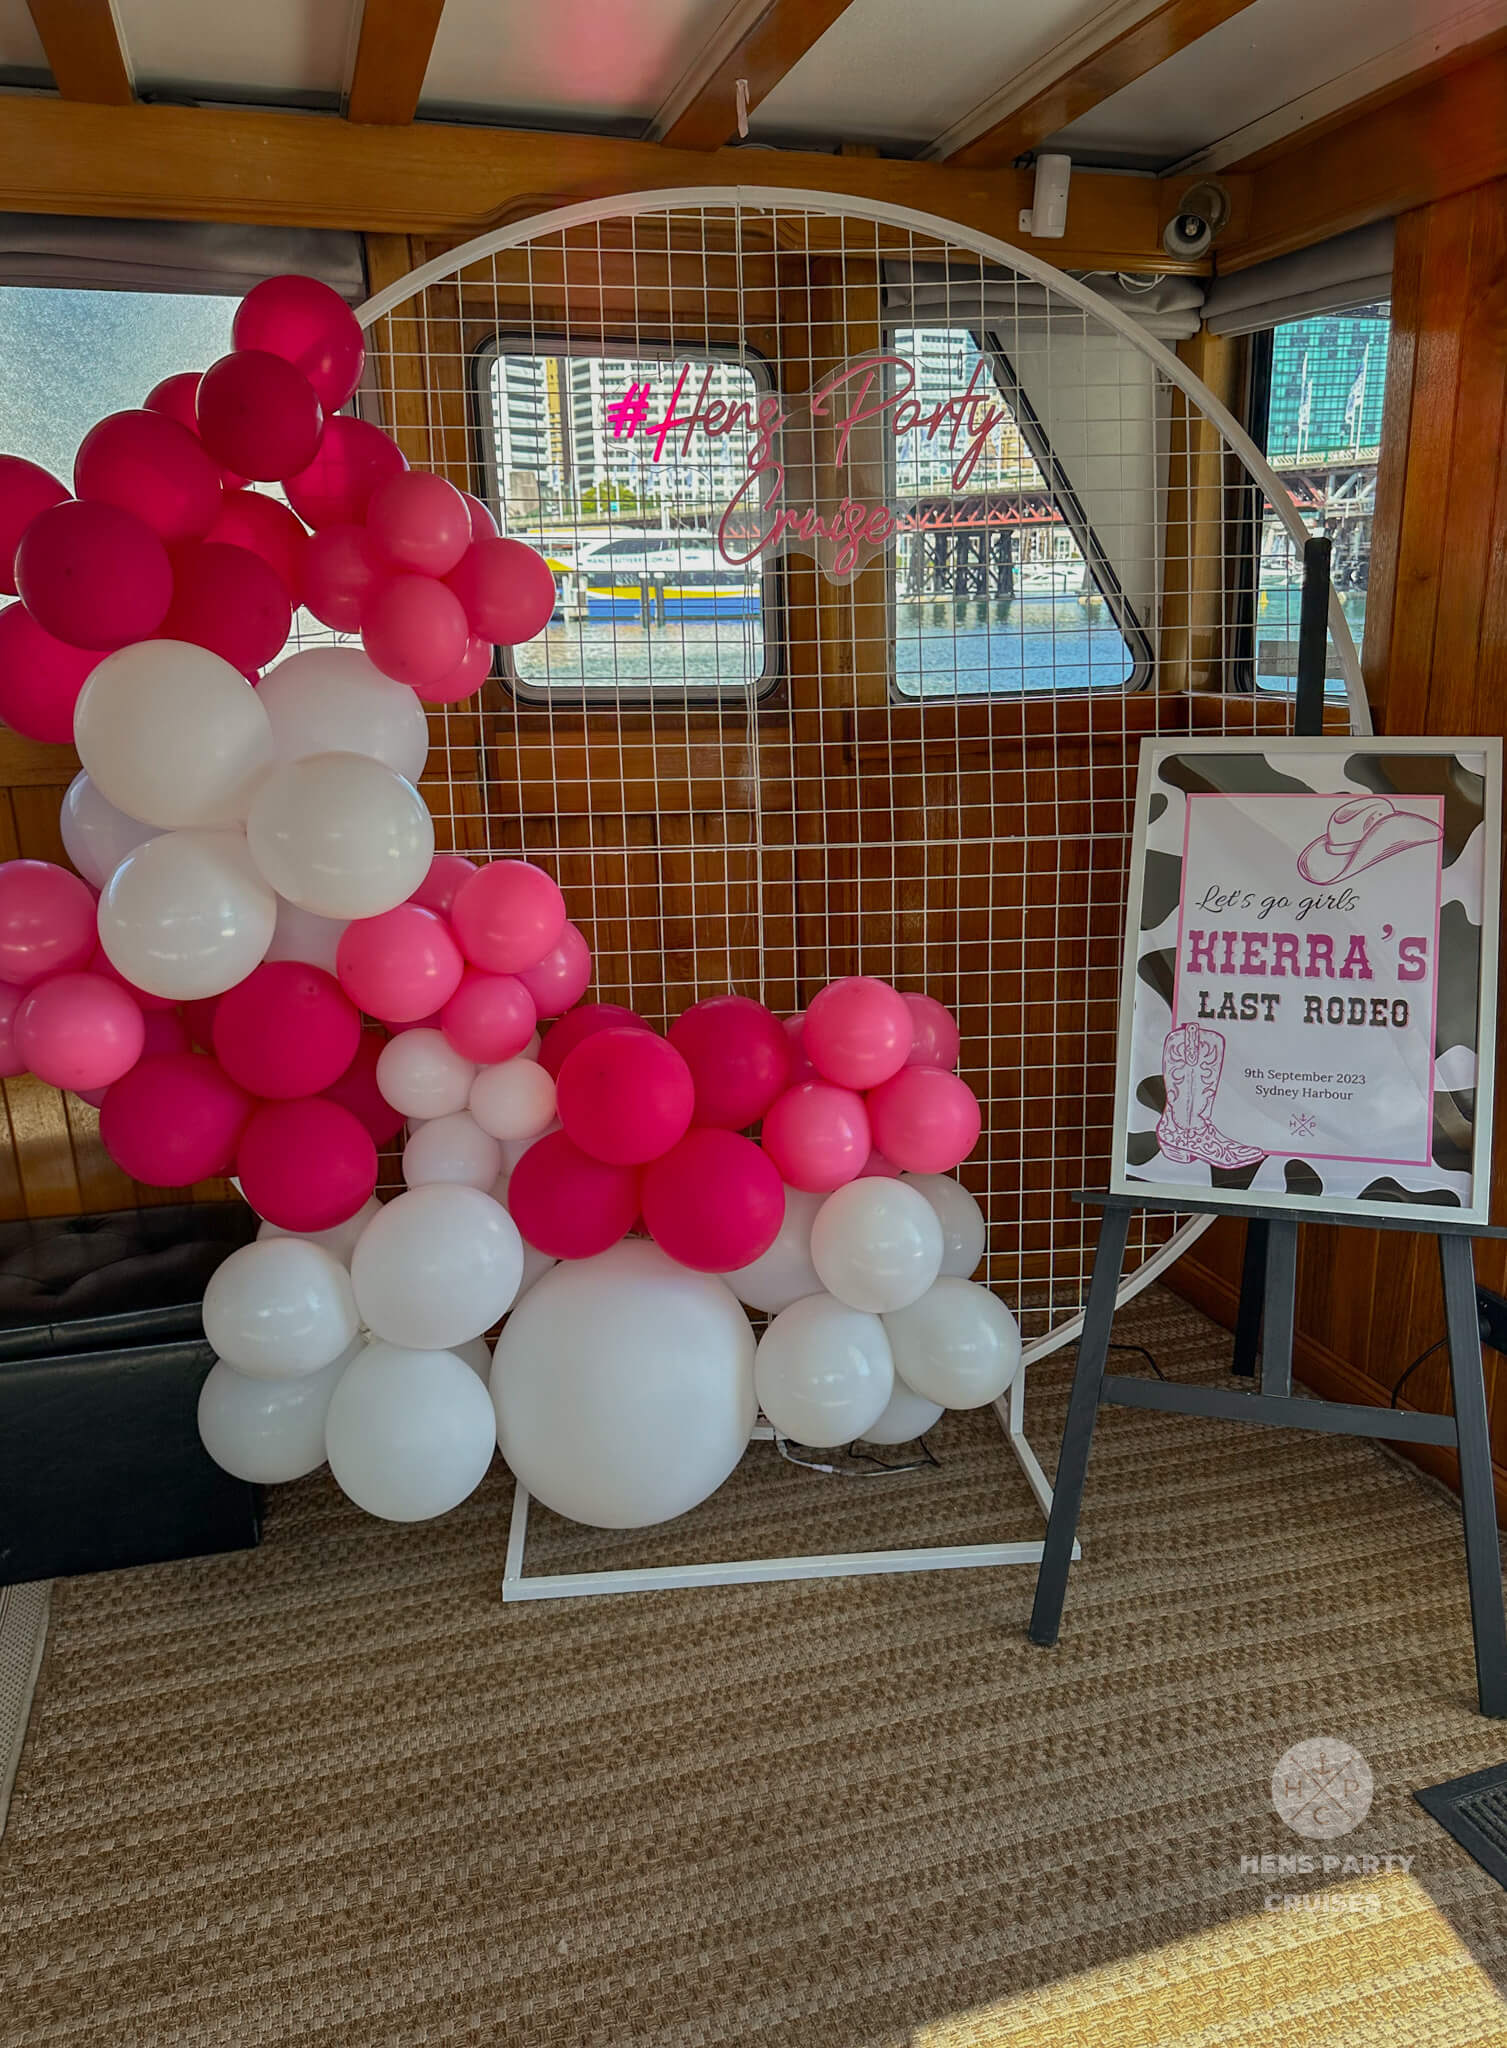 Hens Party Cruises Welcome sign